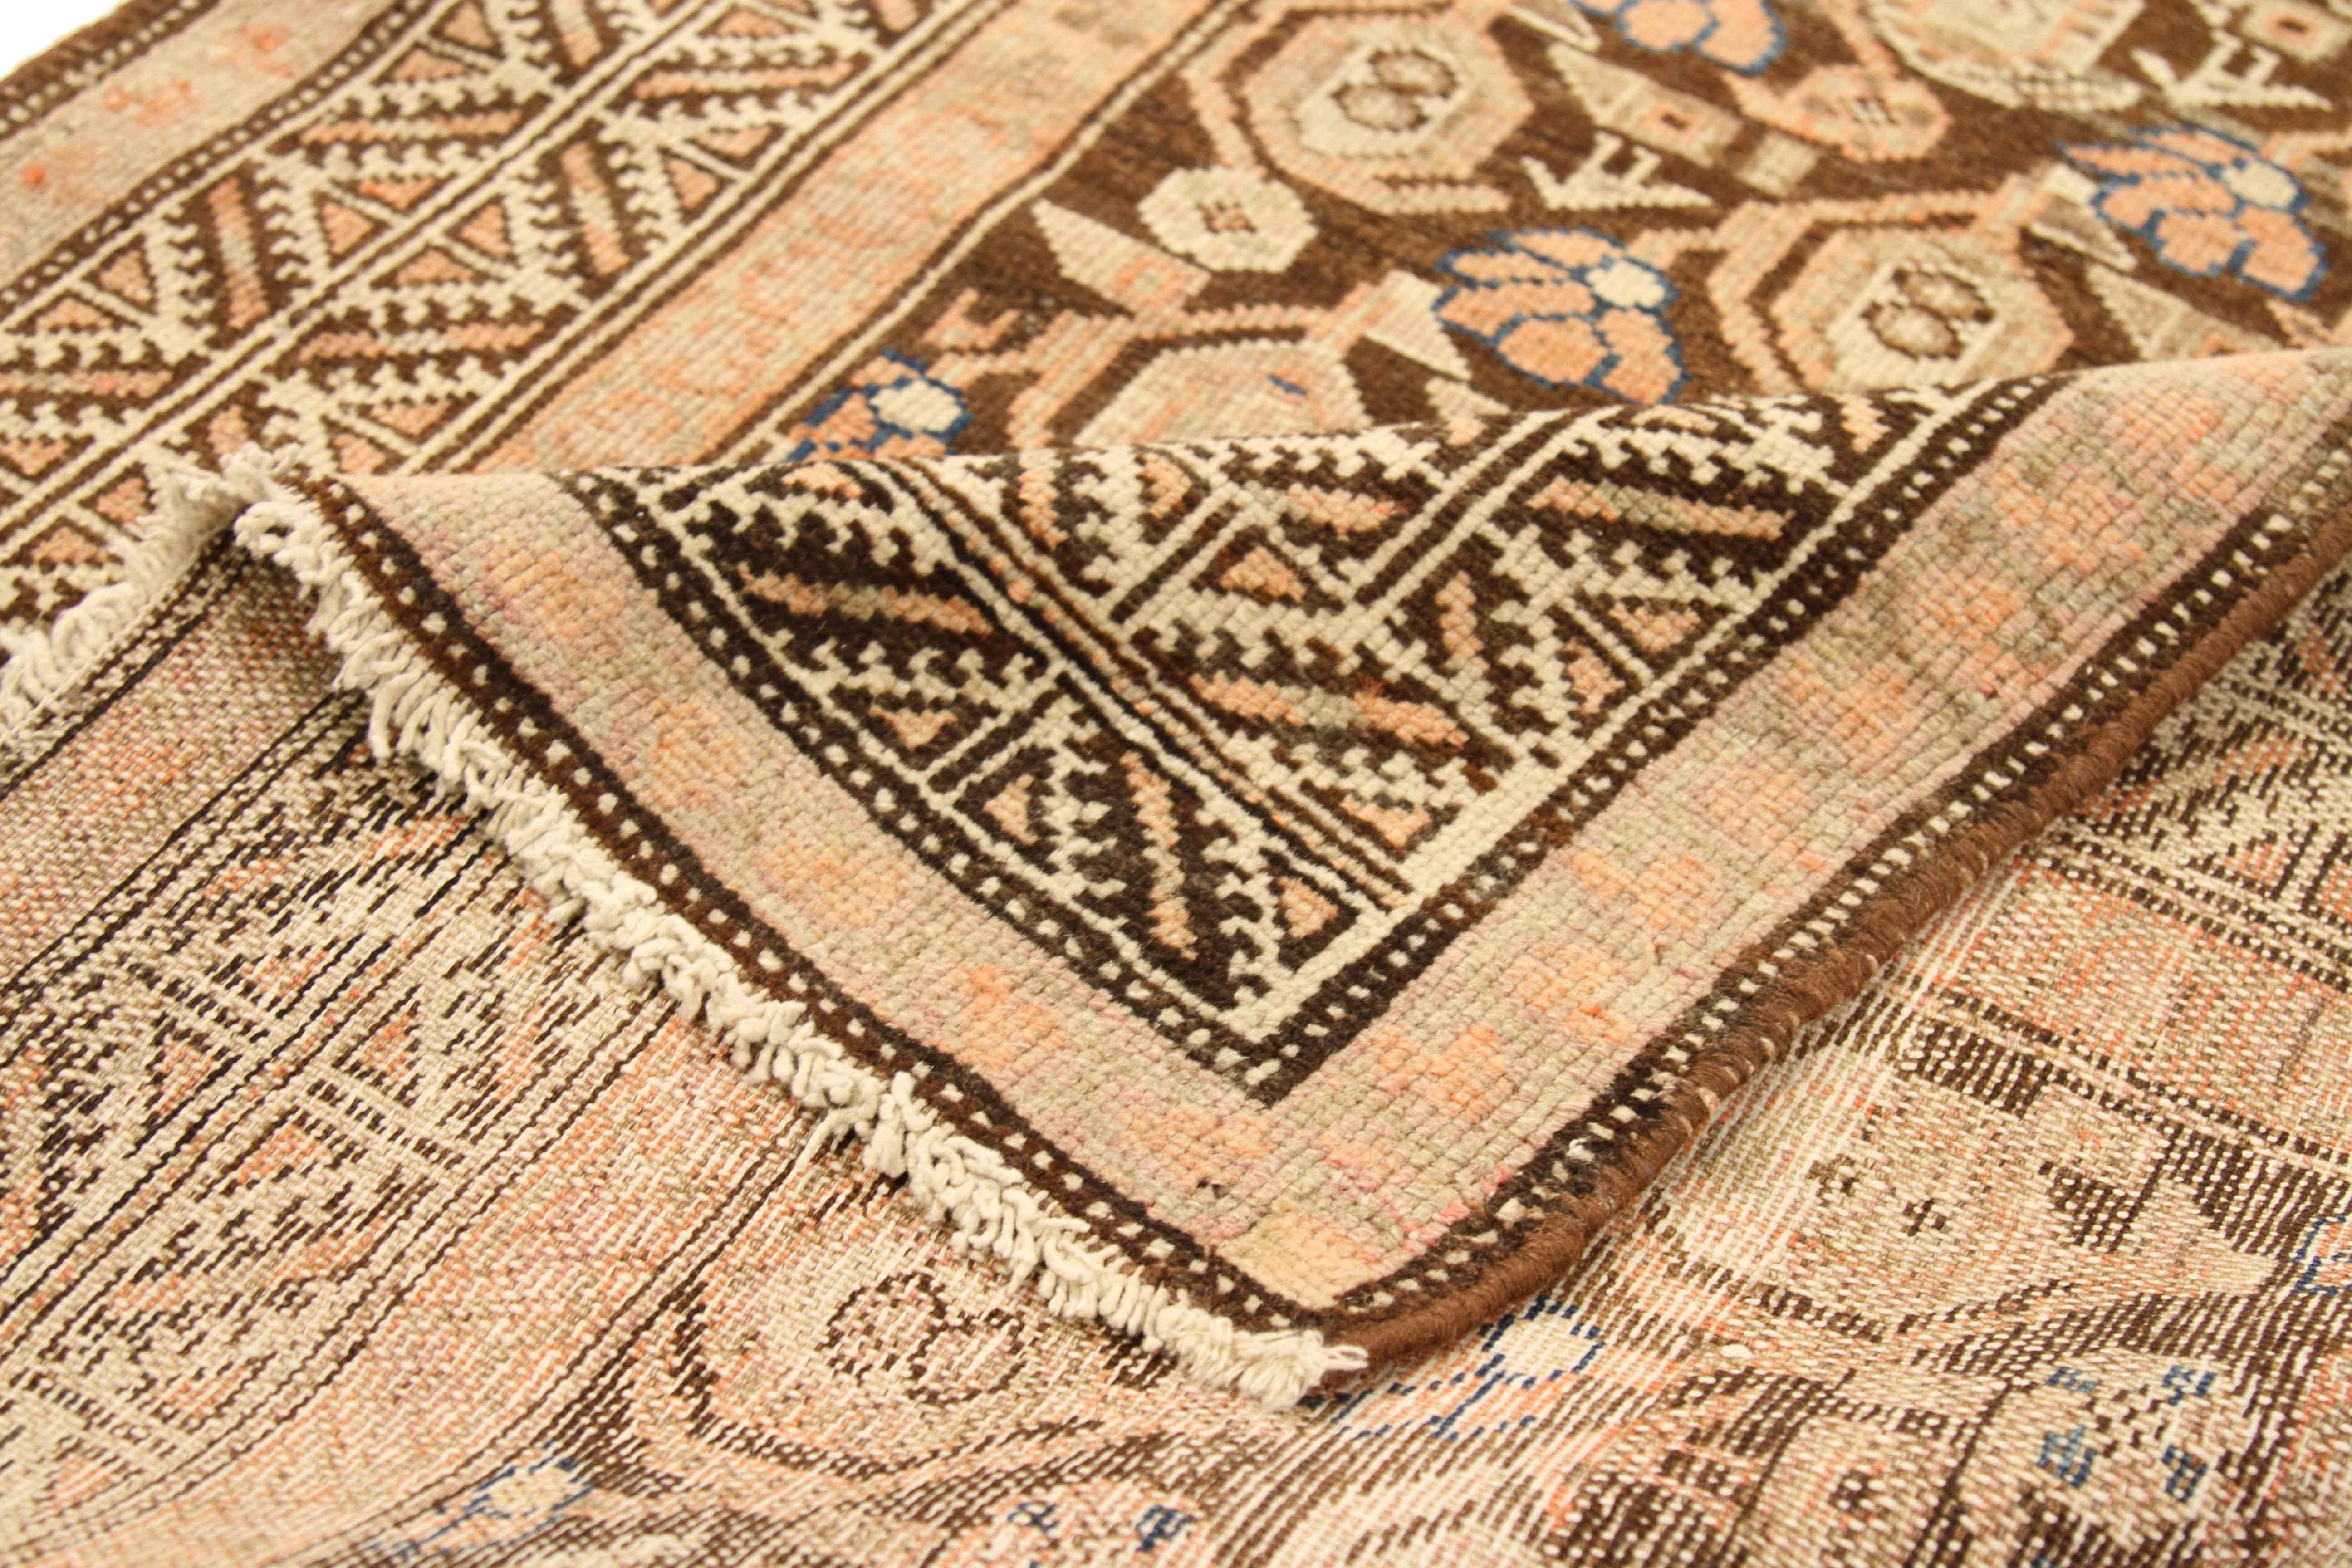 Antique Persian runner rug handwoven from the finest sheep’s wool and colored with all-natural vegetable dyes that are safe for humans and pets. It’s a traditional Malayer design featuring ‘Boteh’ details in pink and beige over a brown center field.